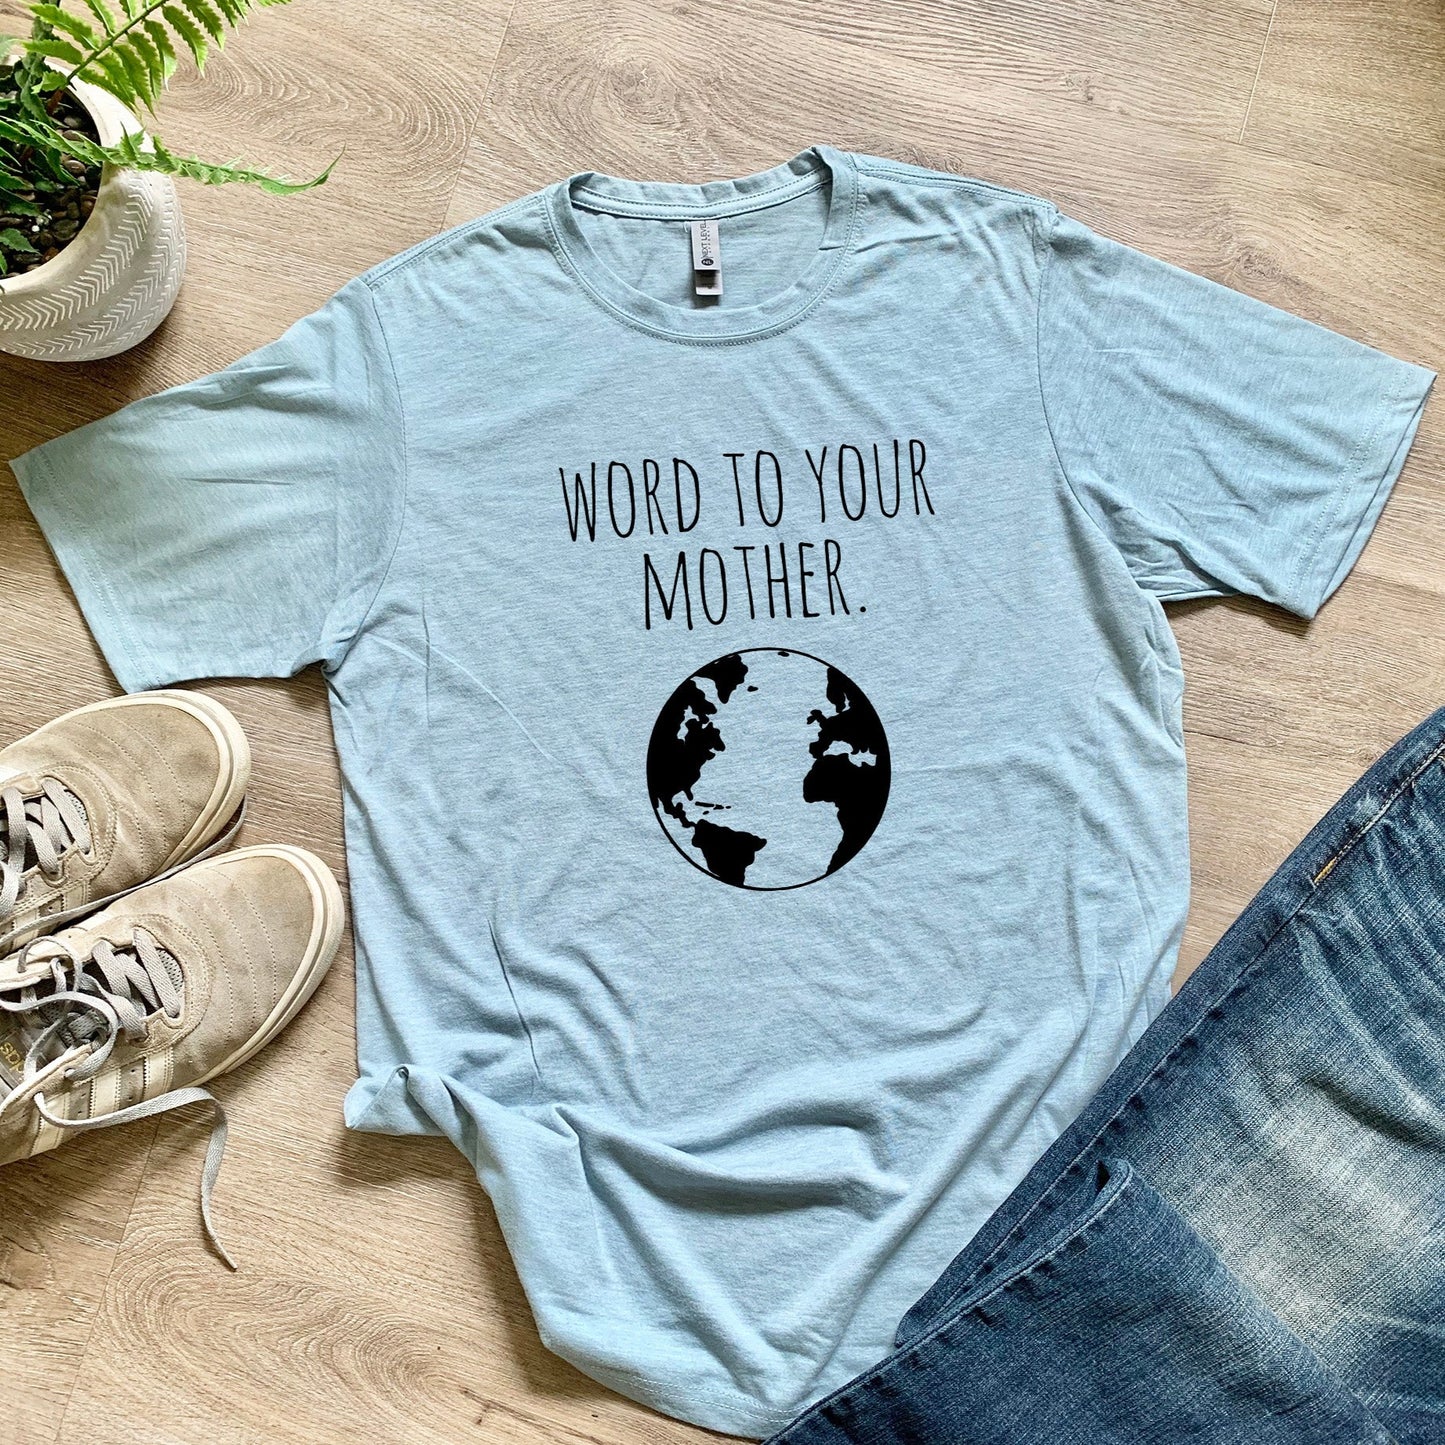 Word to Your Mother (Earth) - Men's / Unisex Tee - Stonewash Blue or Sage